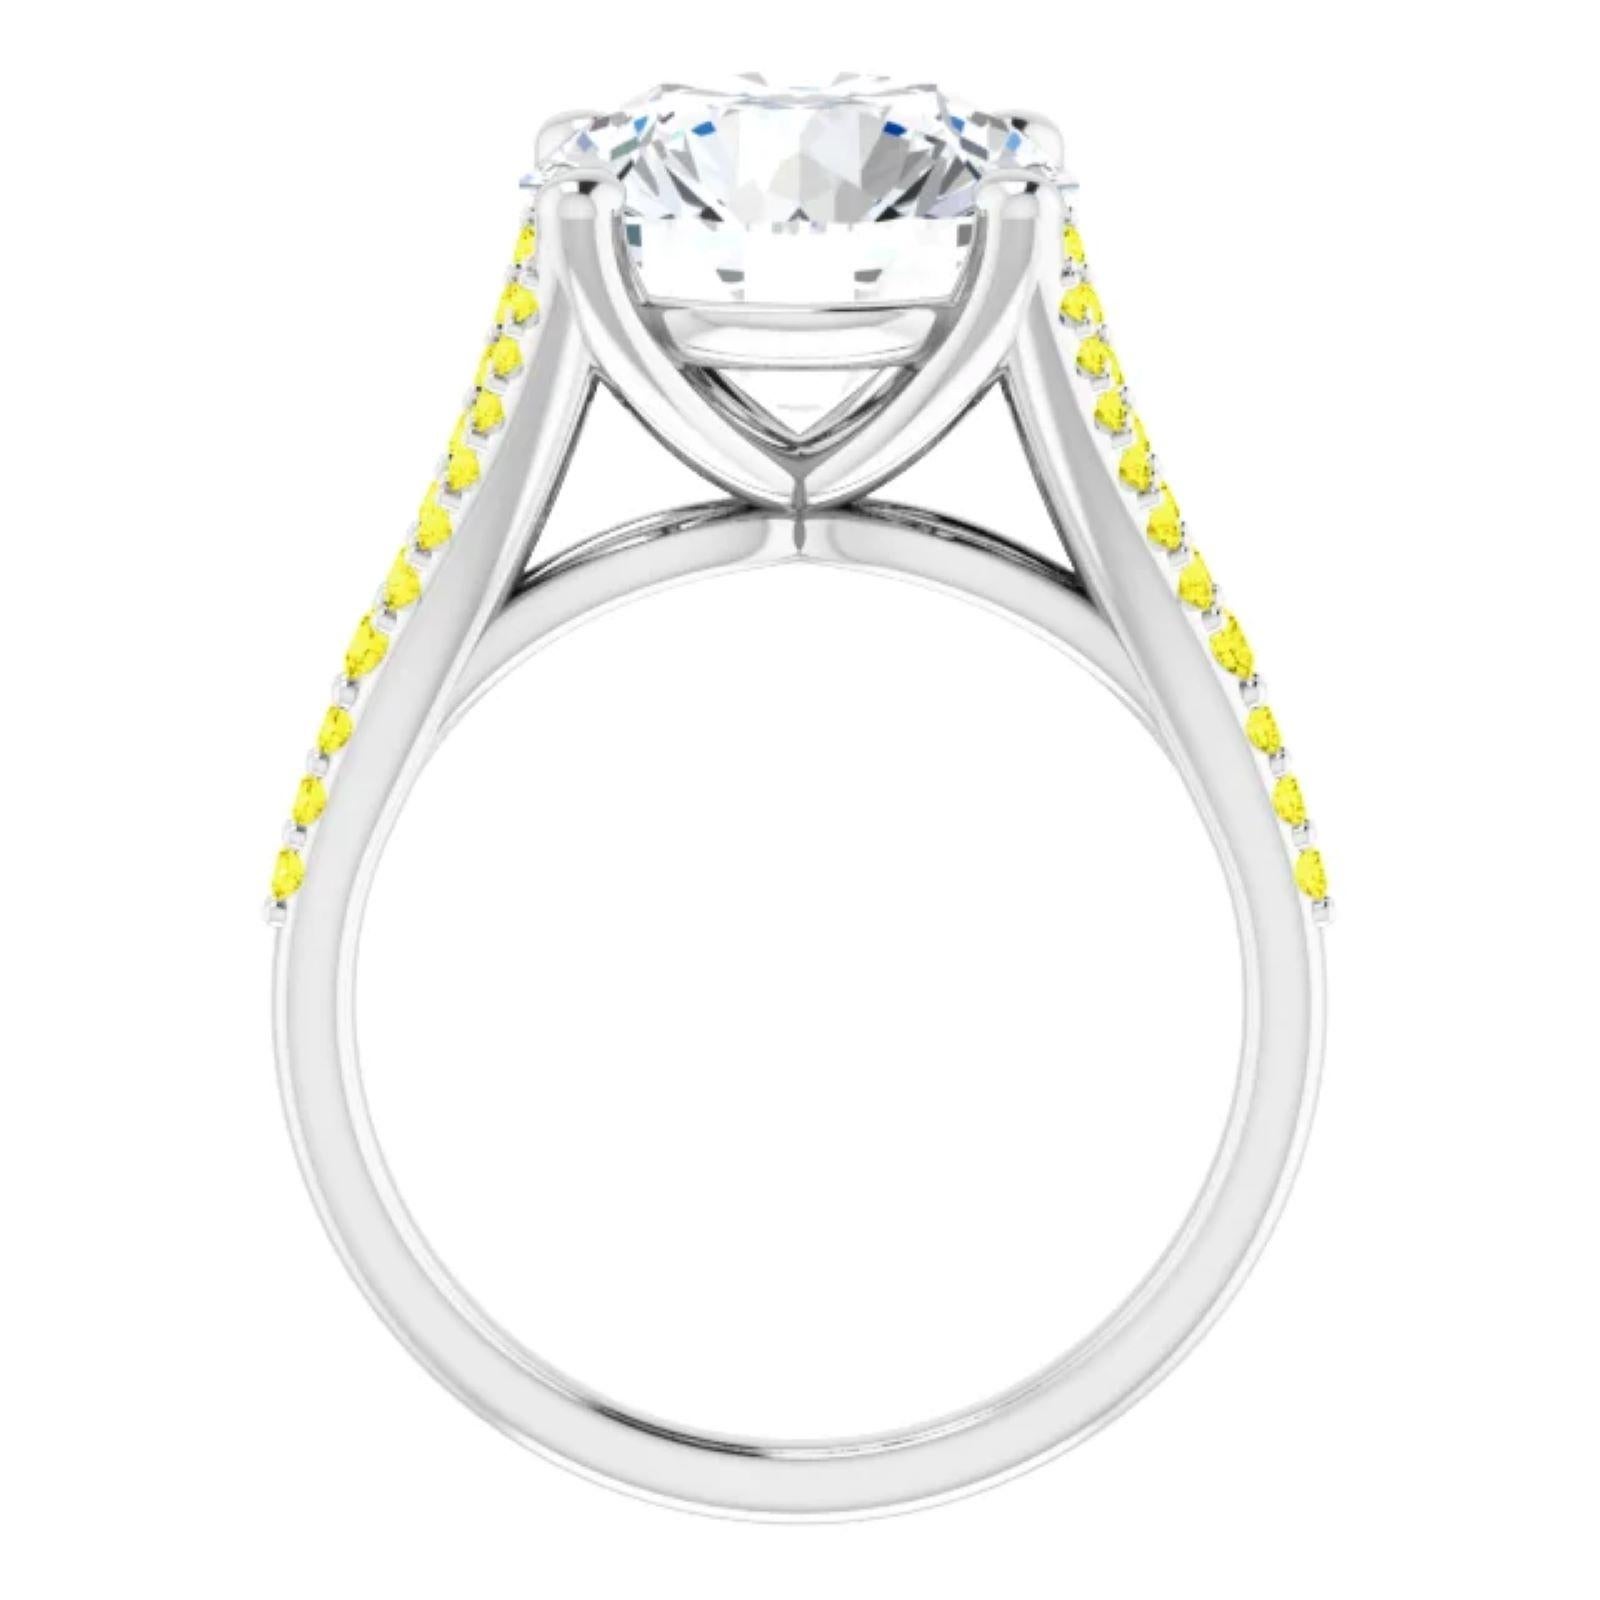 For Sale:  5 carat canary and white diamond engagement ring 5